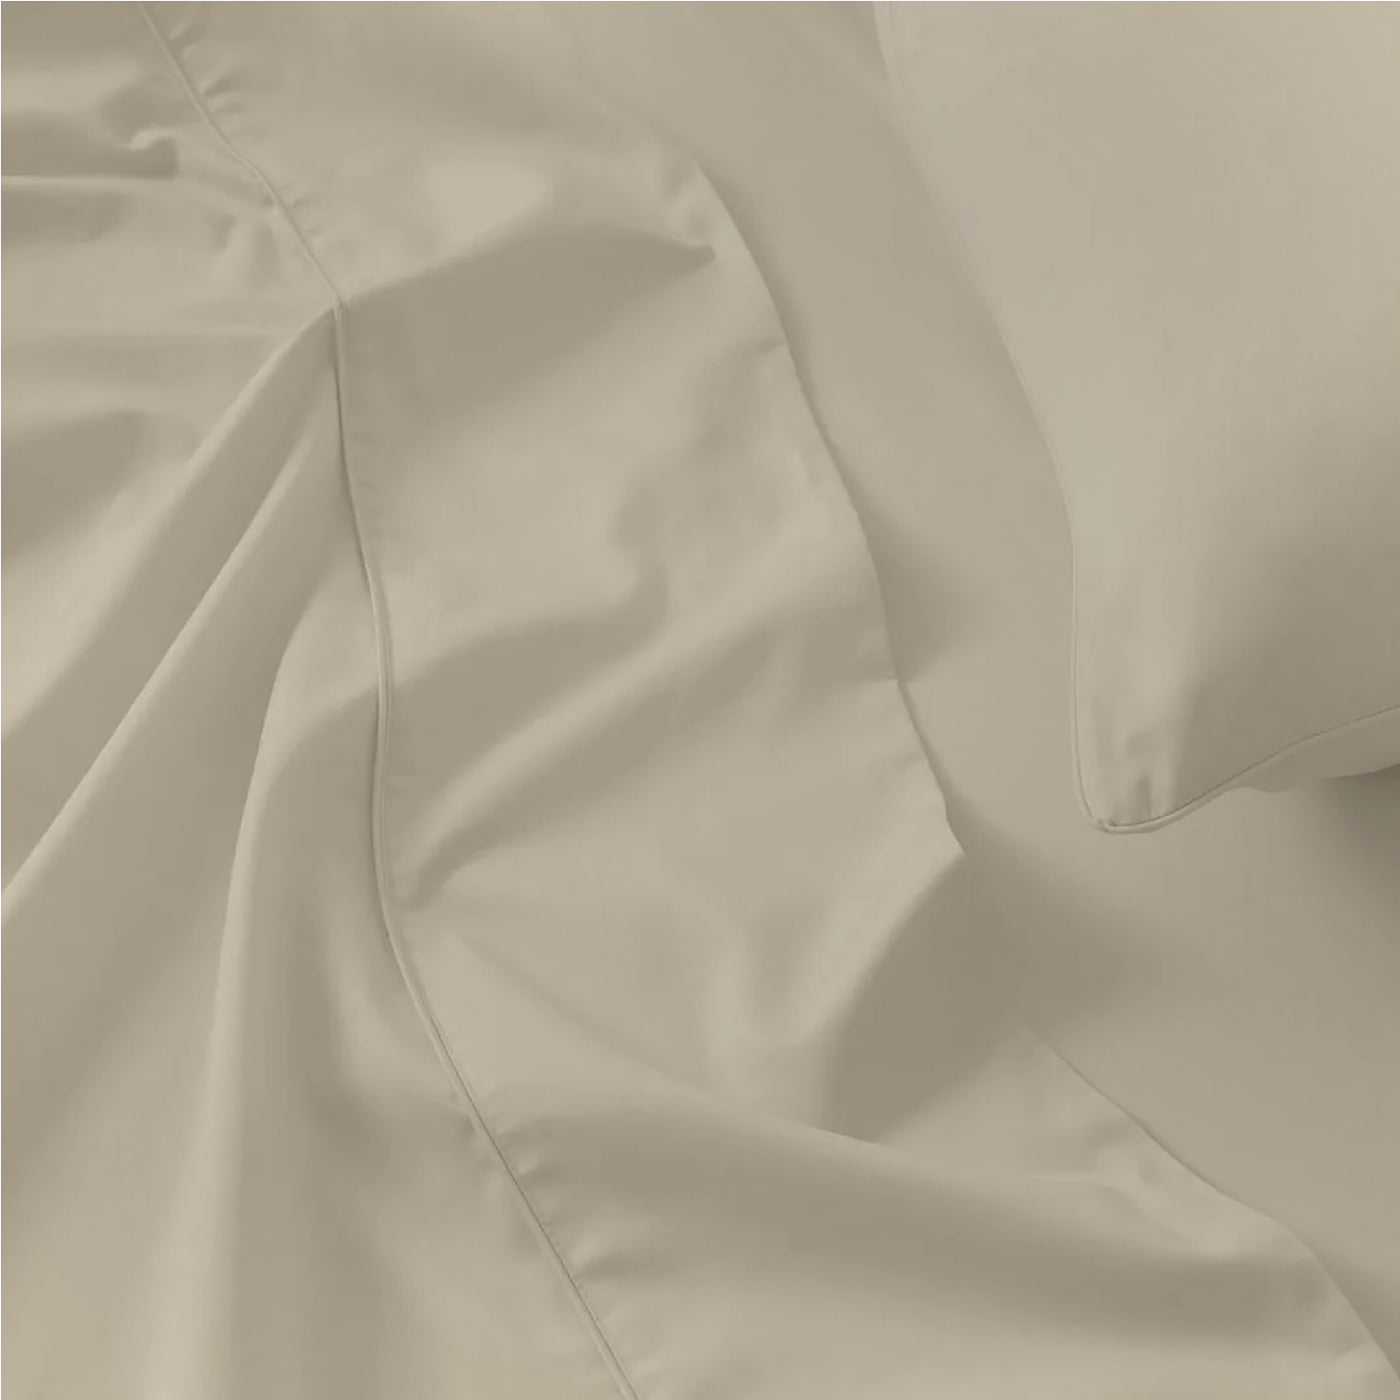 4 Piece Solid Bed Sheet Set 100% Egyptian Cotton 600 Thread Count - Light Colors